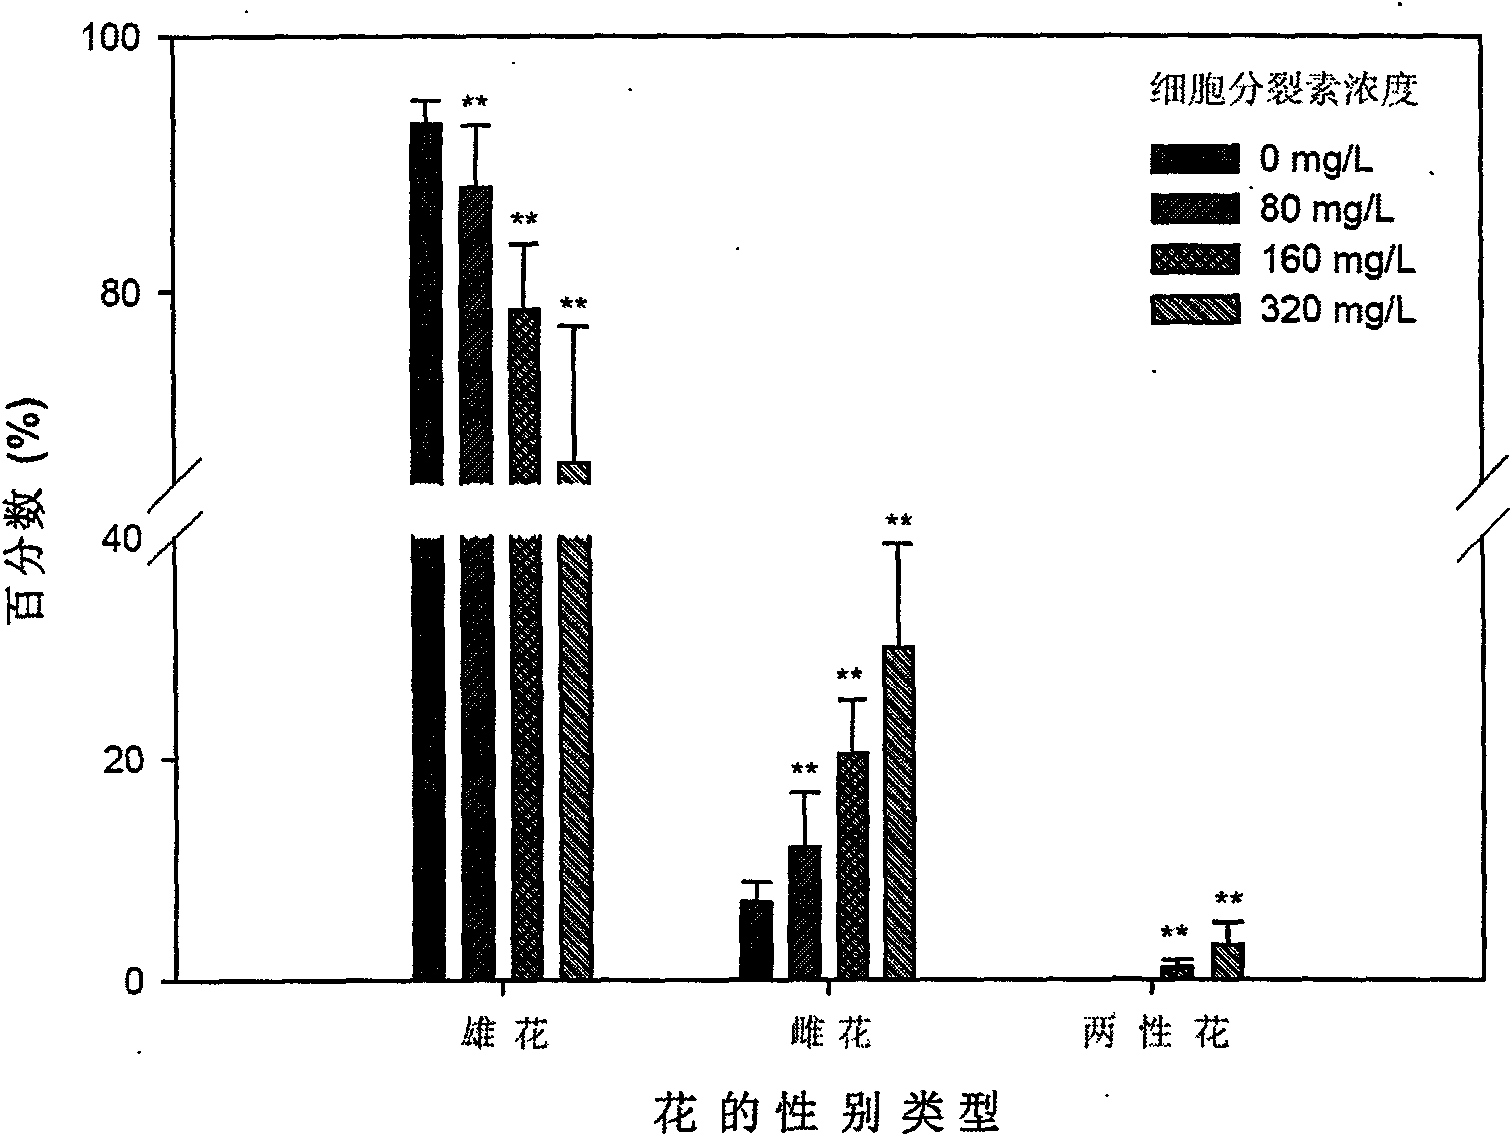 Special growth regulating agent for jatropha and application thereof